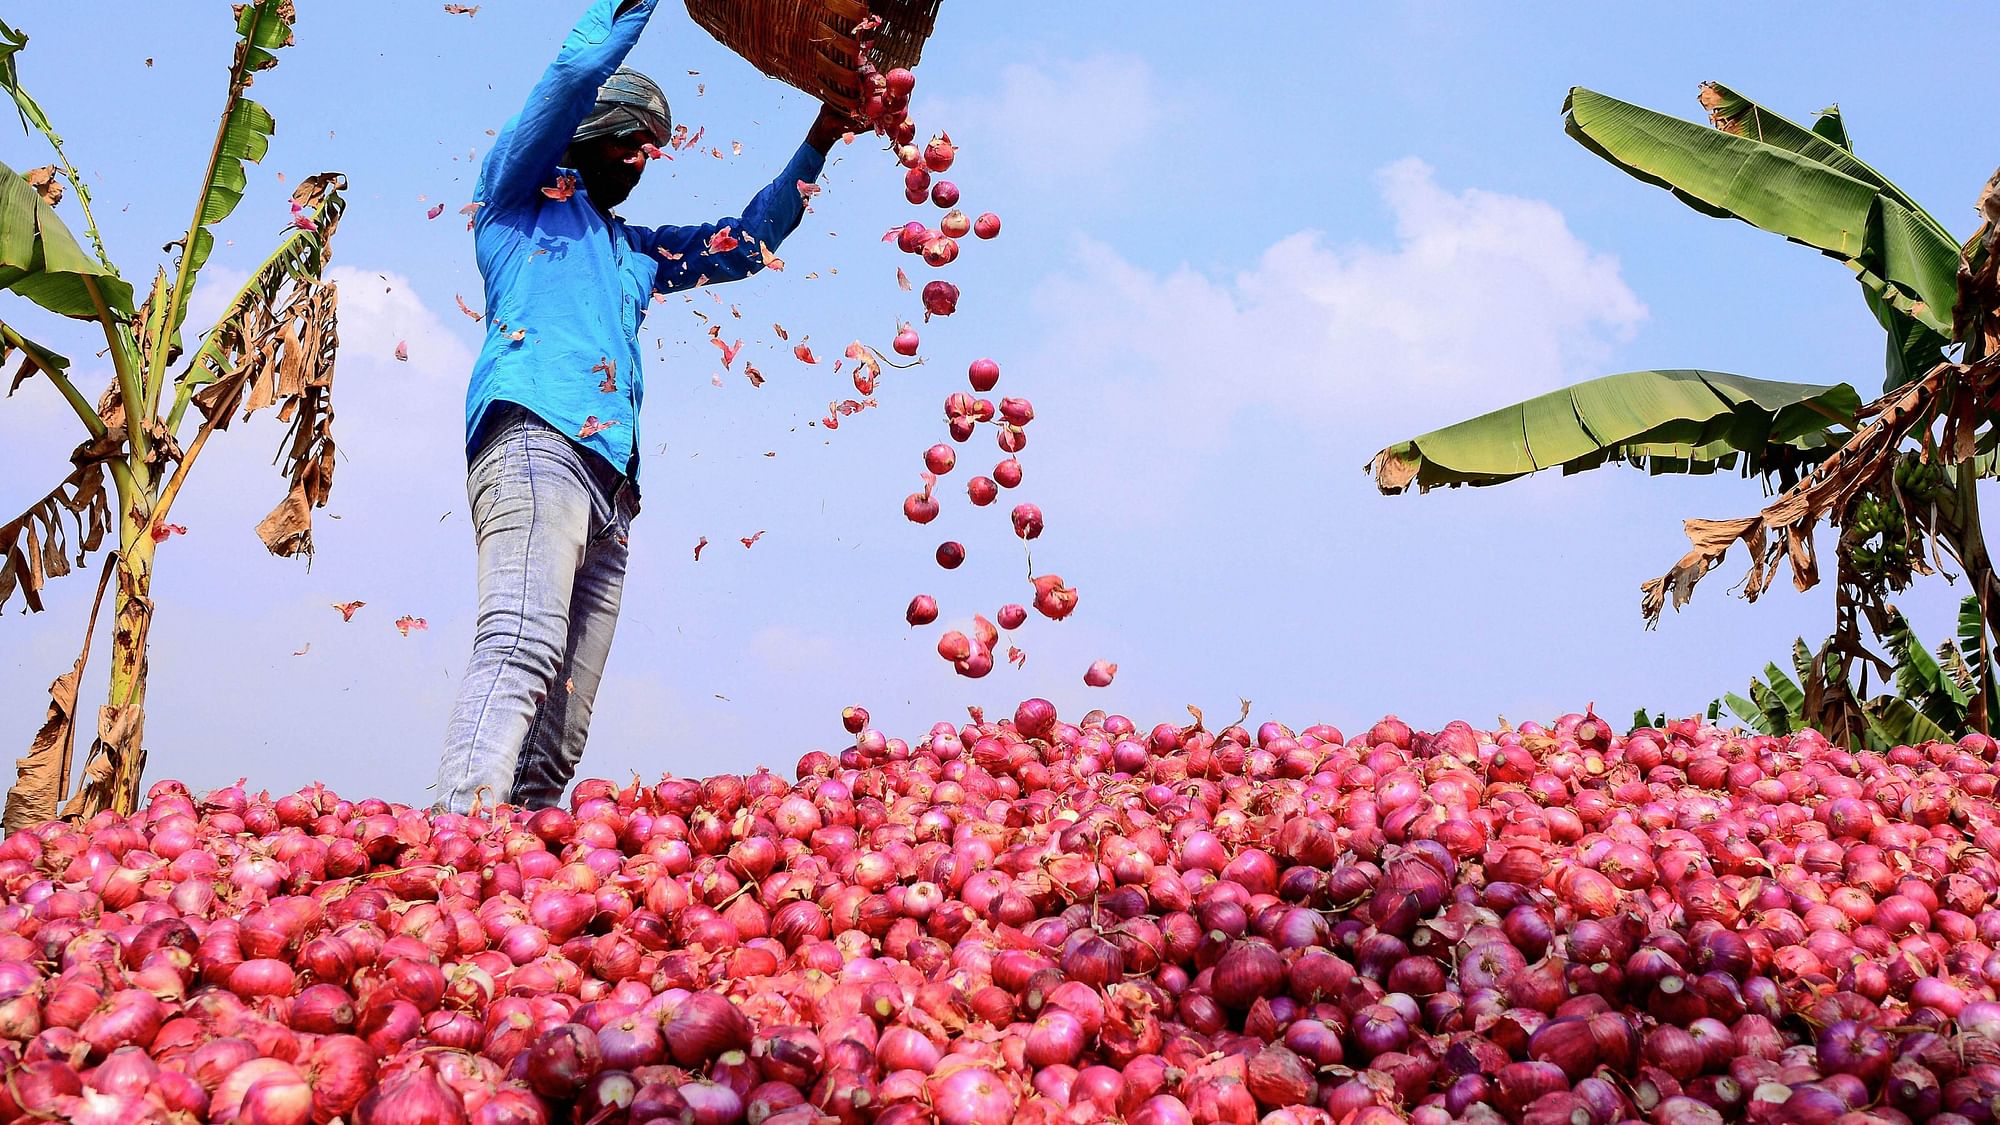 Govt to allow onion export from 15 March.